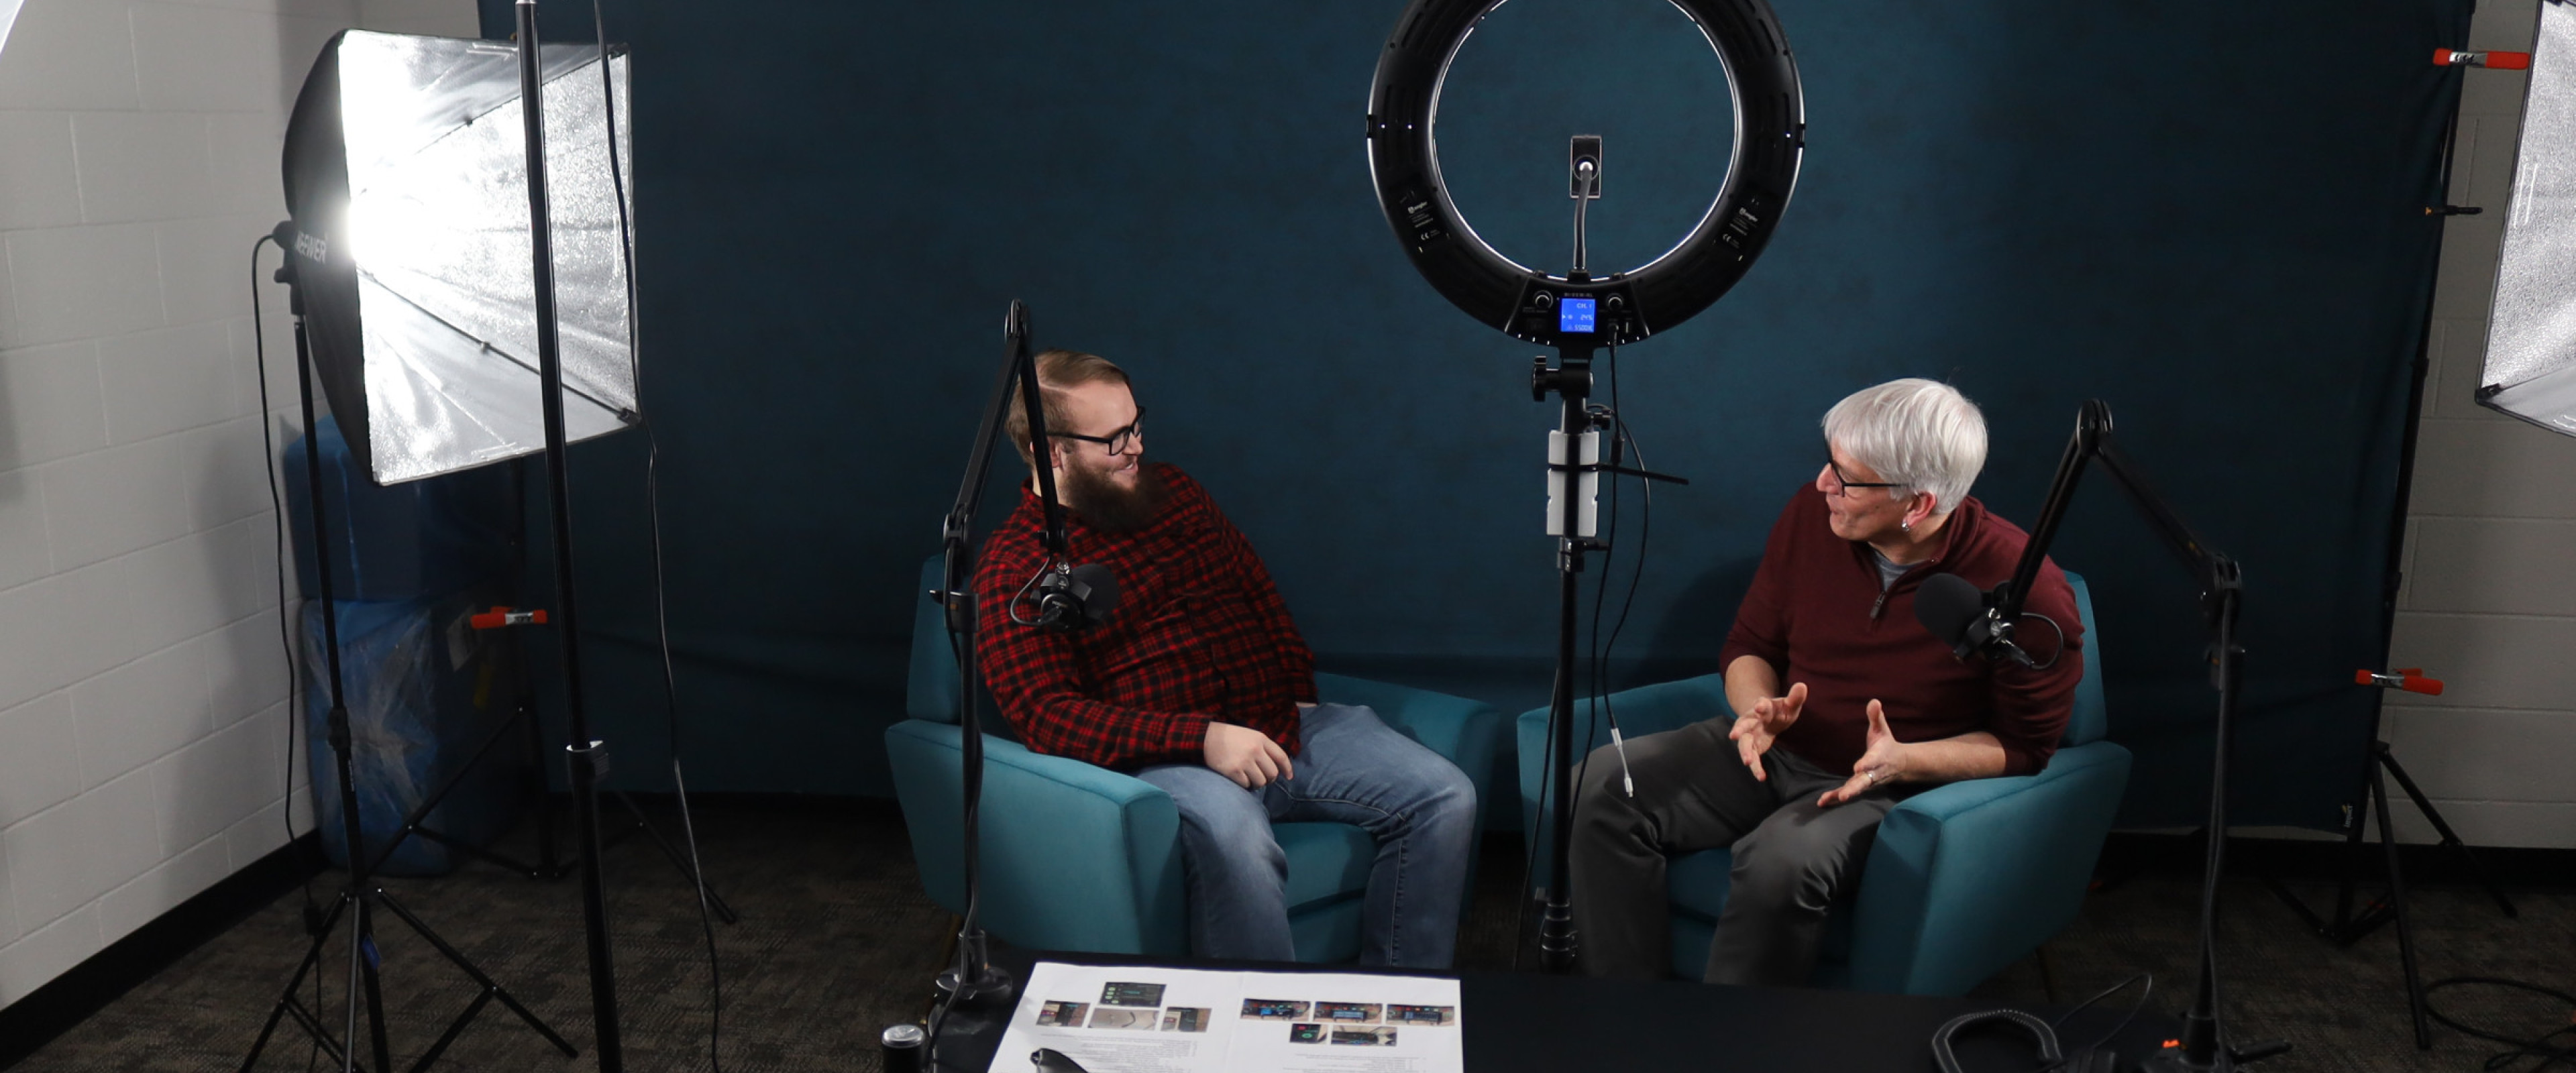 Image inside podcasting studio with two people seated in chairs, lighting fixtures, and microphones.